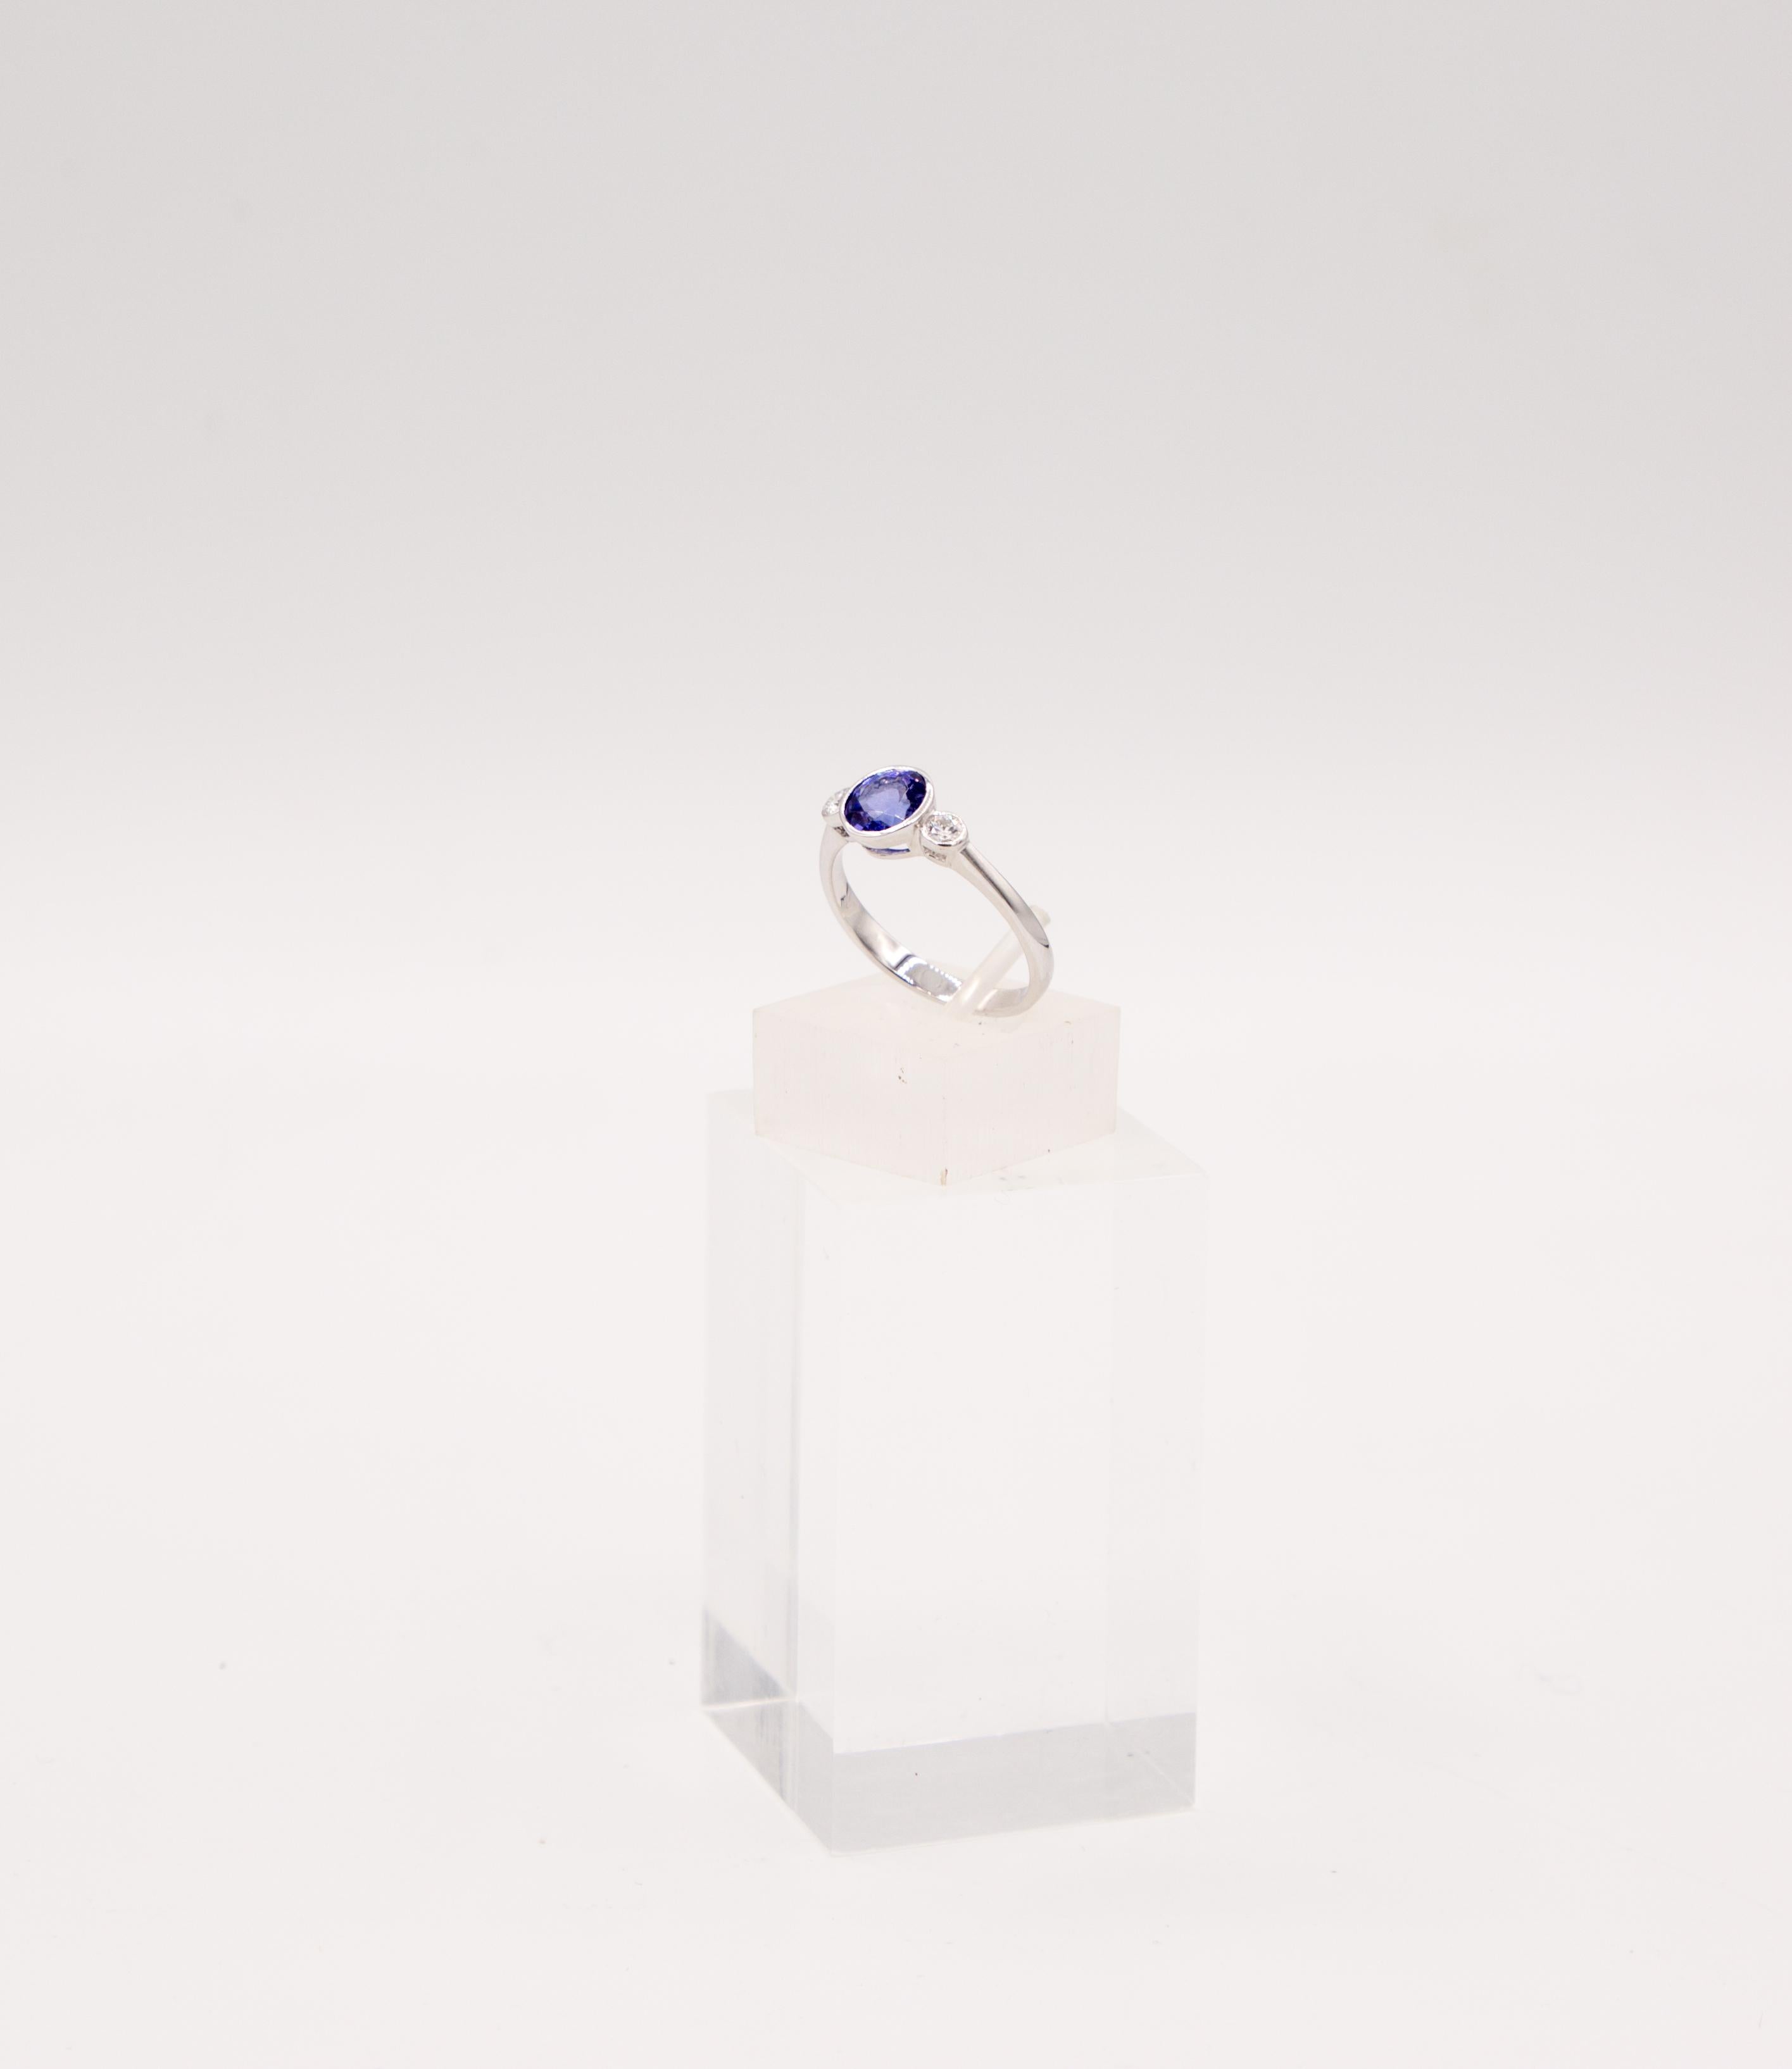 18 k white gold
0,64 ct Tanzanit
0,06 ct Diamond
size 54,5
3,1 gram
This beautiful tanzanites ring you can wear every day 
we although have the earrings for a set